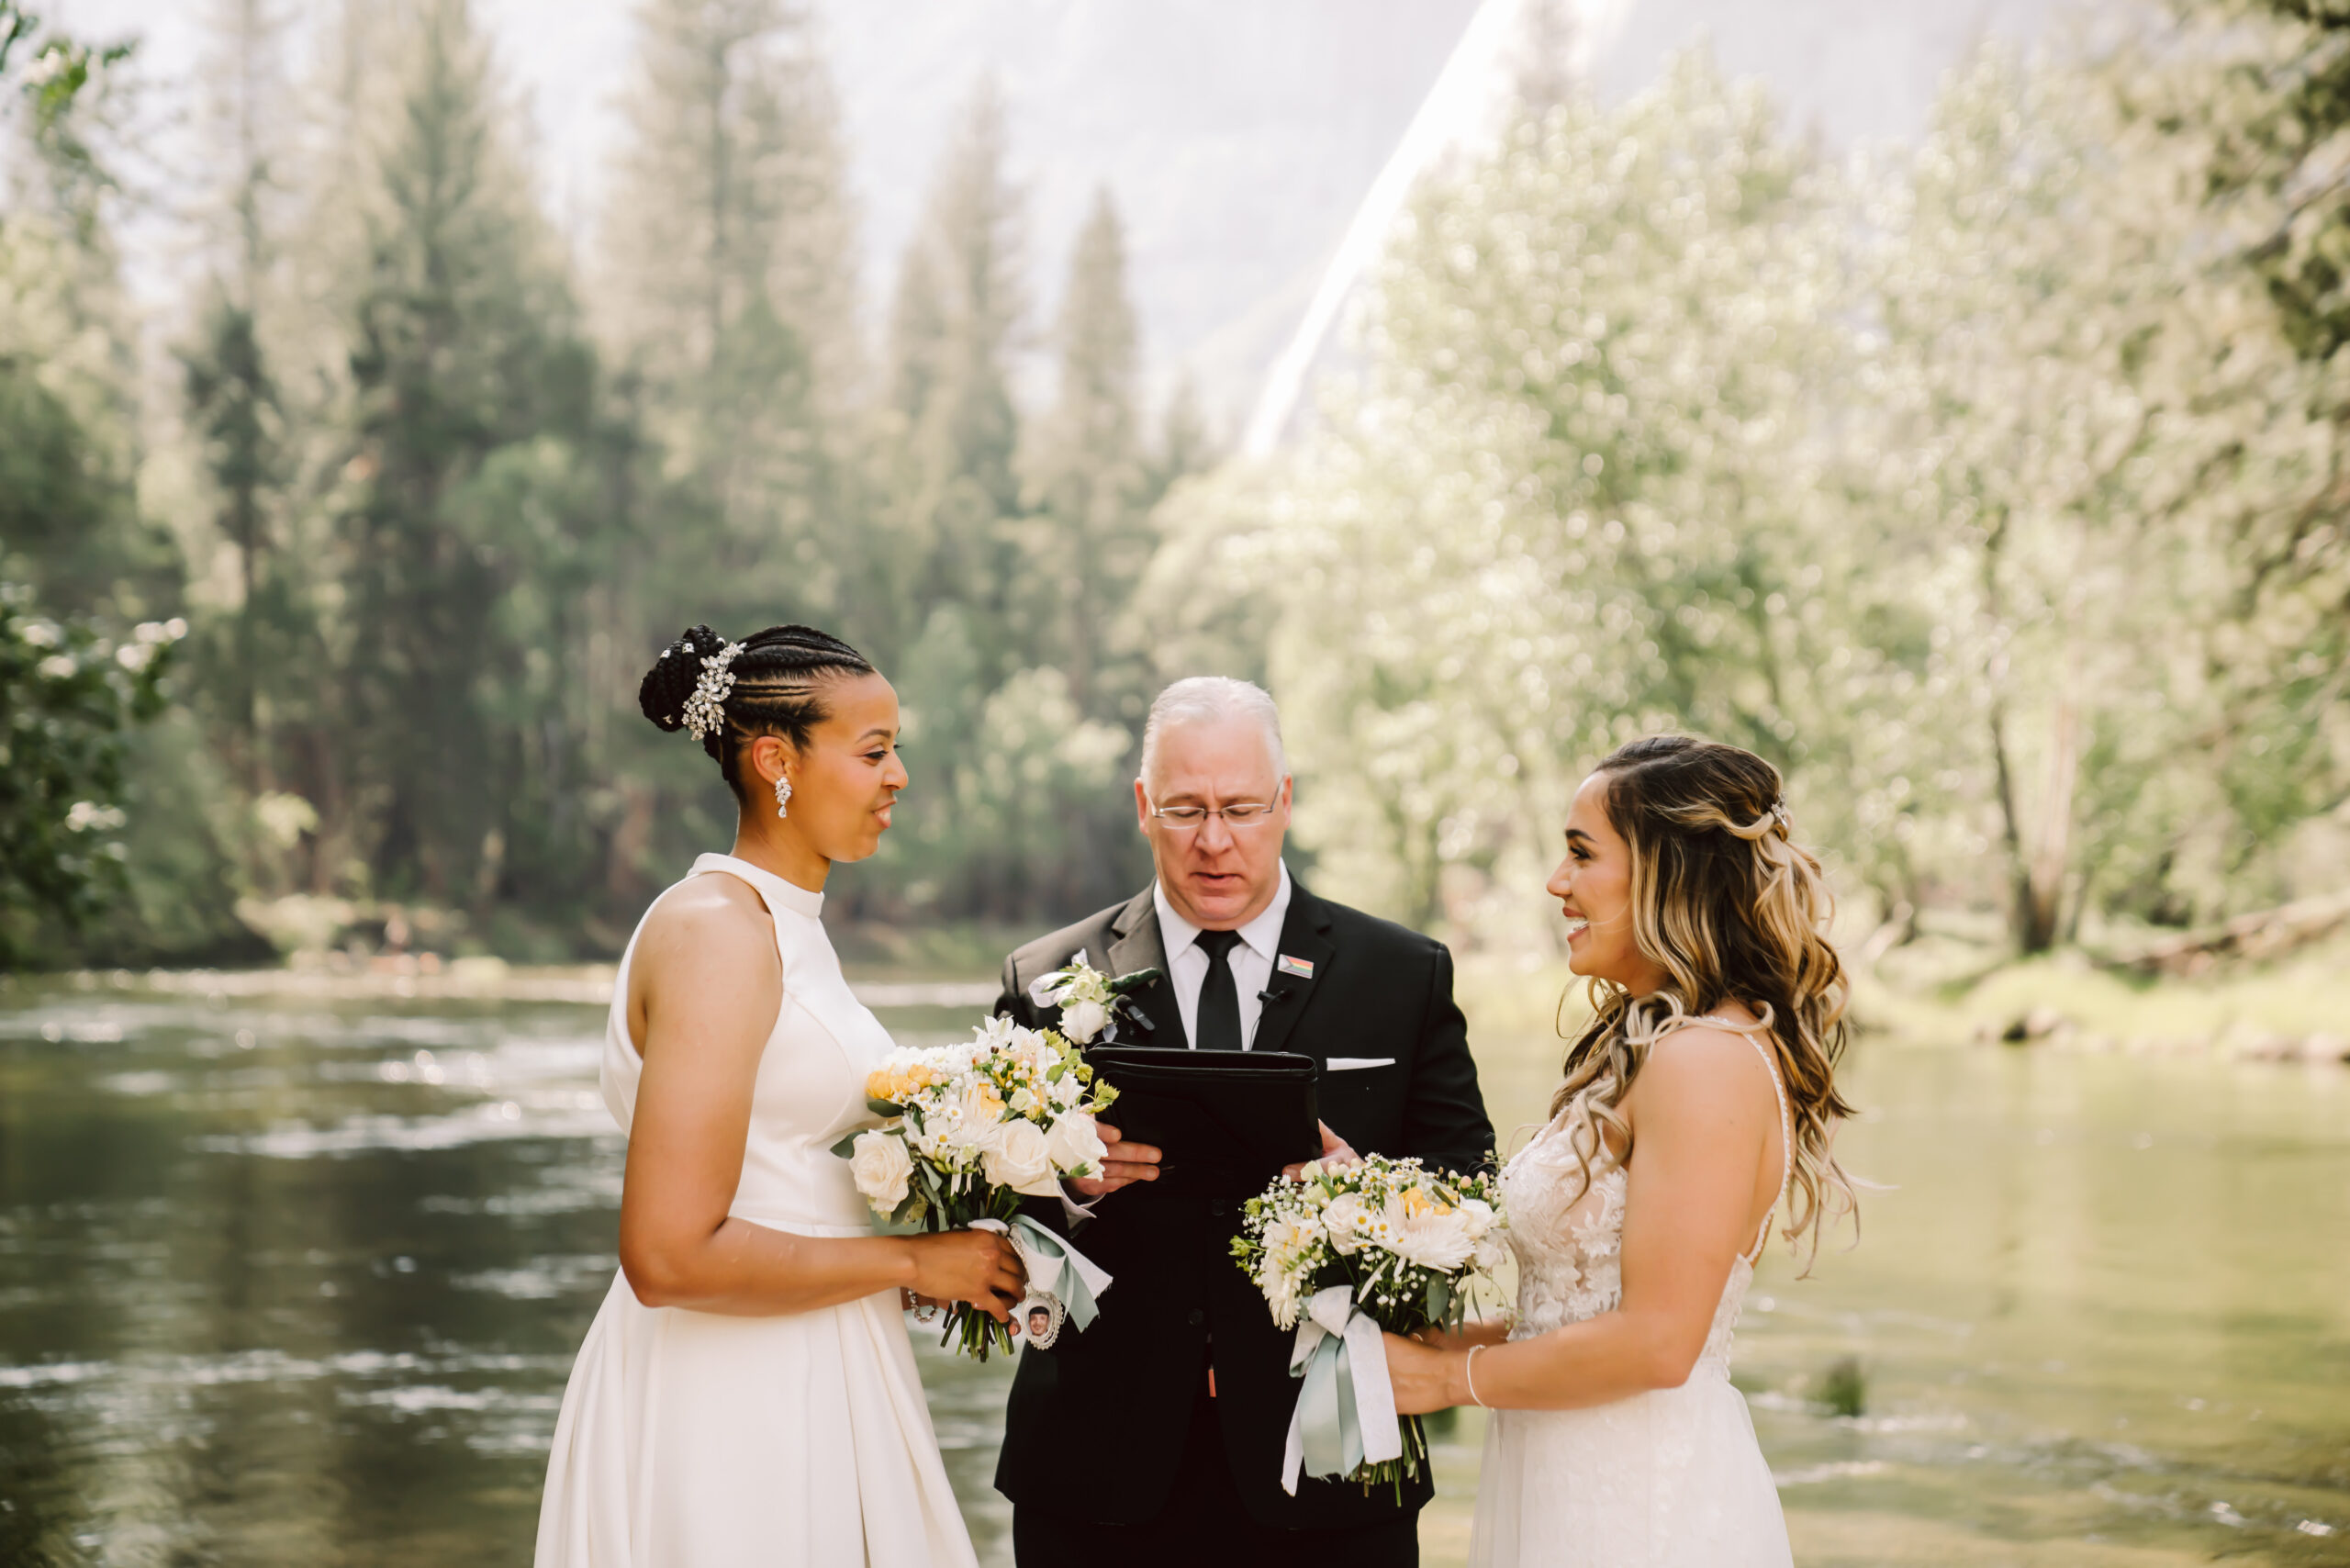 Two brides in white dresses getting married in Yosemite with the trees and the mountains as the backdrop